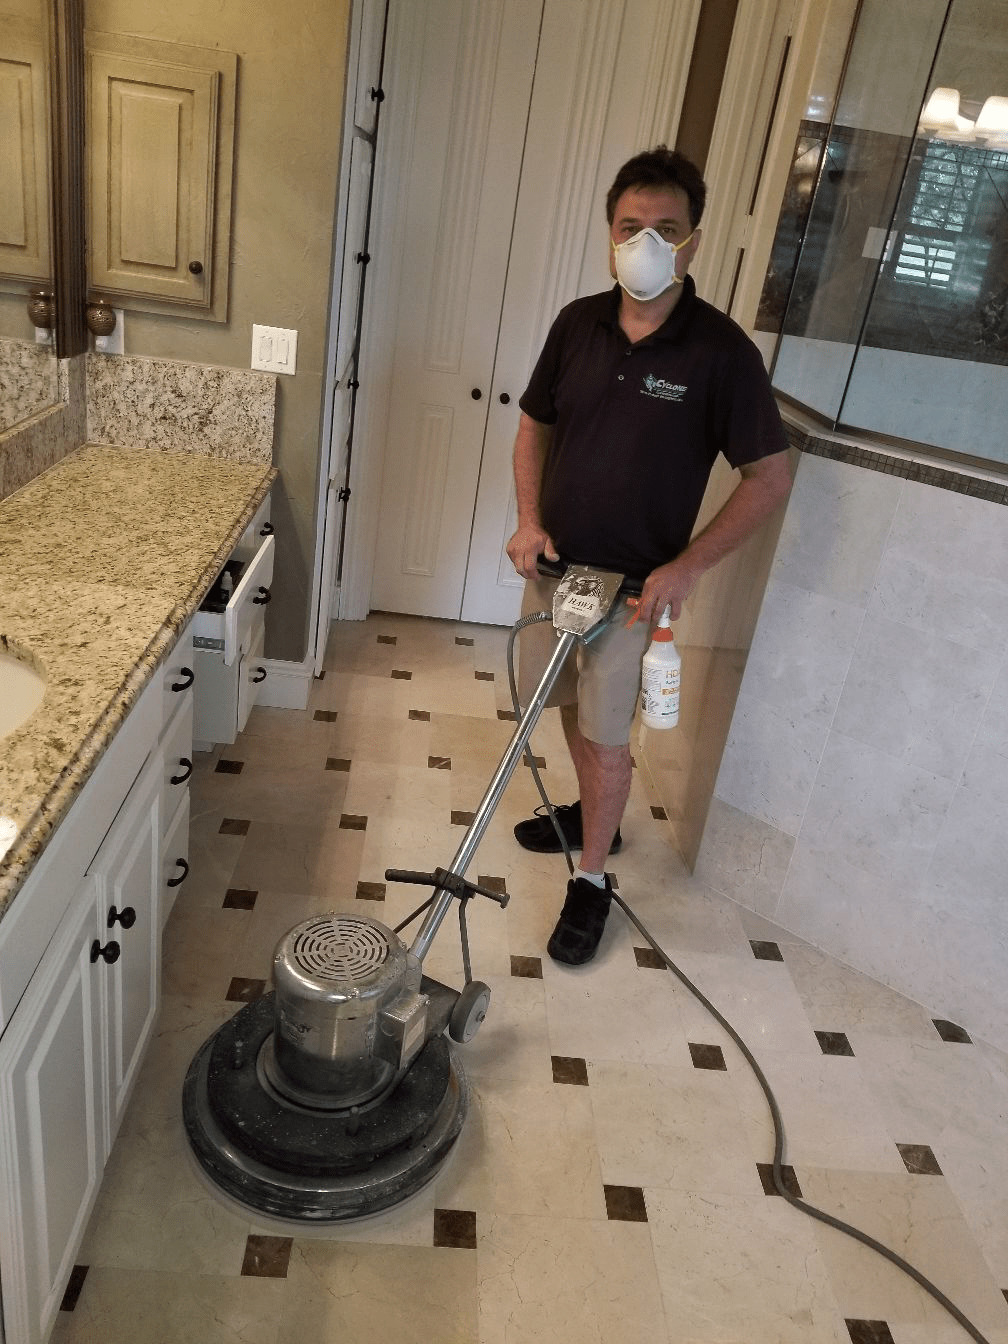 Wearing a mask while restoring a marble bathroom floor in McKinney Texas on 7/14/20